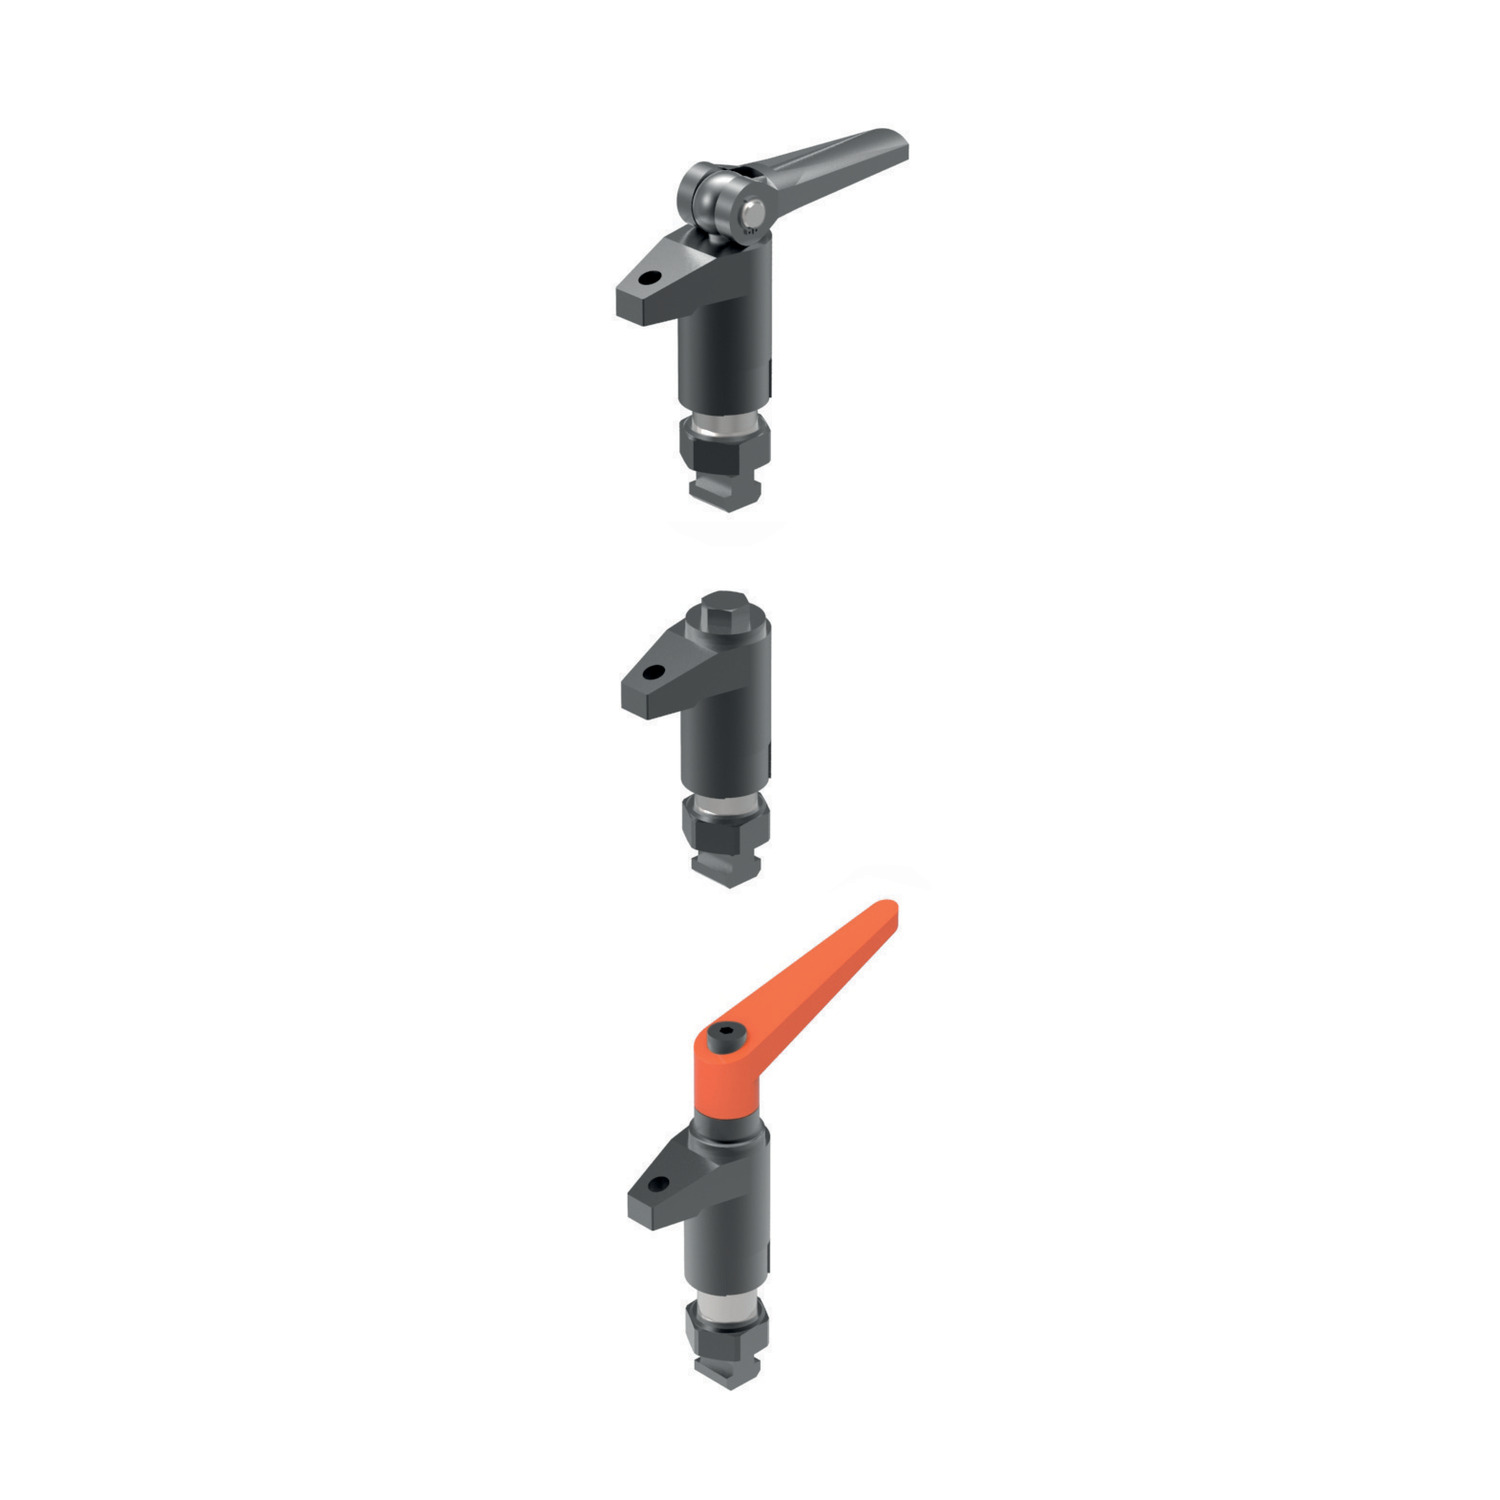 Down Thrust Clamps Made from case-hardened steel. Offers rapid manual clamping with easy removal of workpieces.